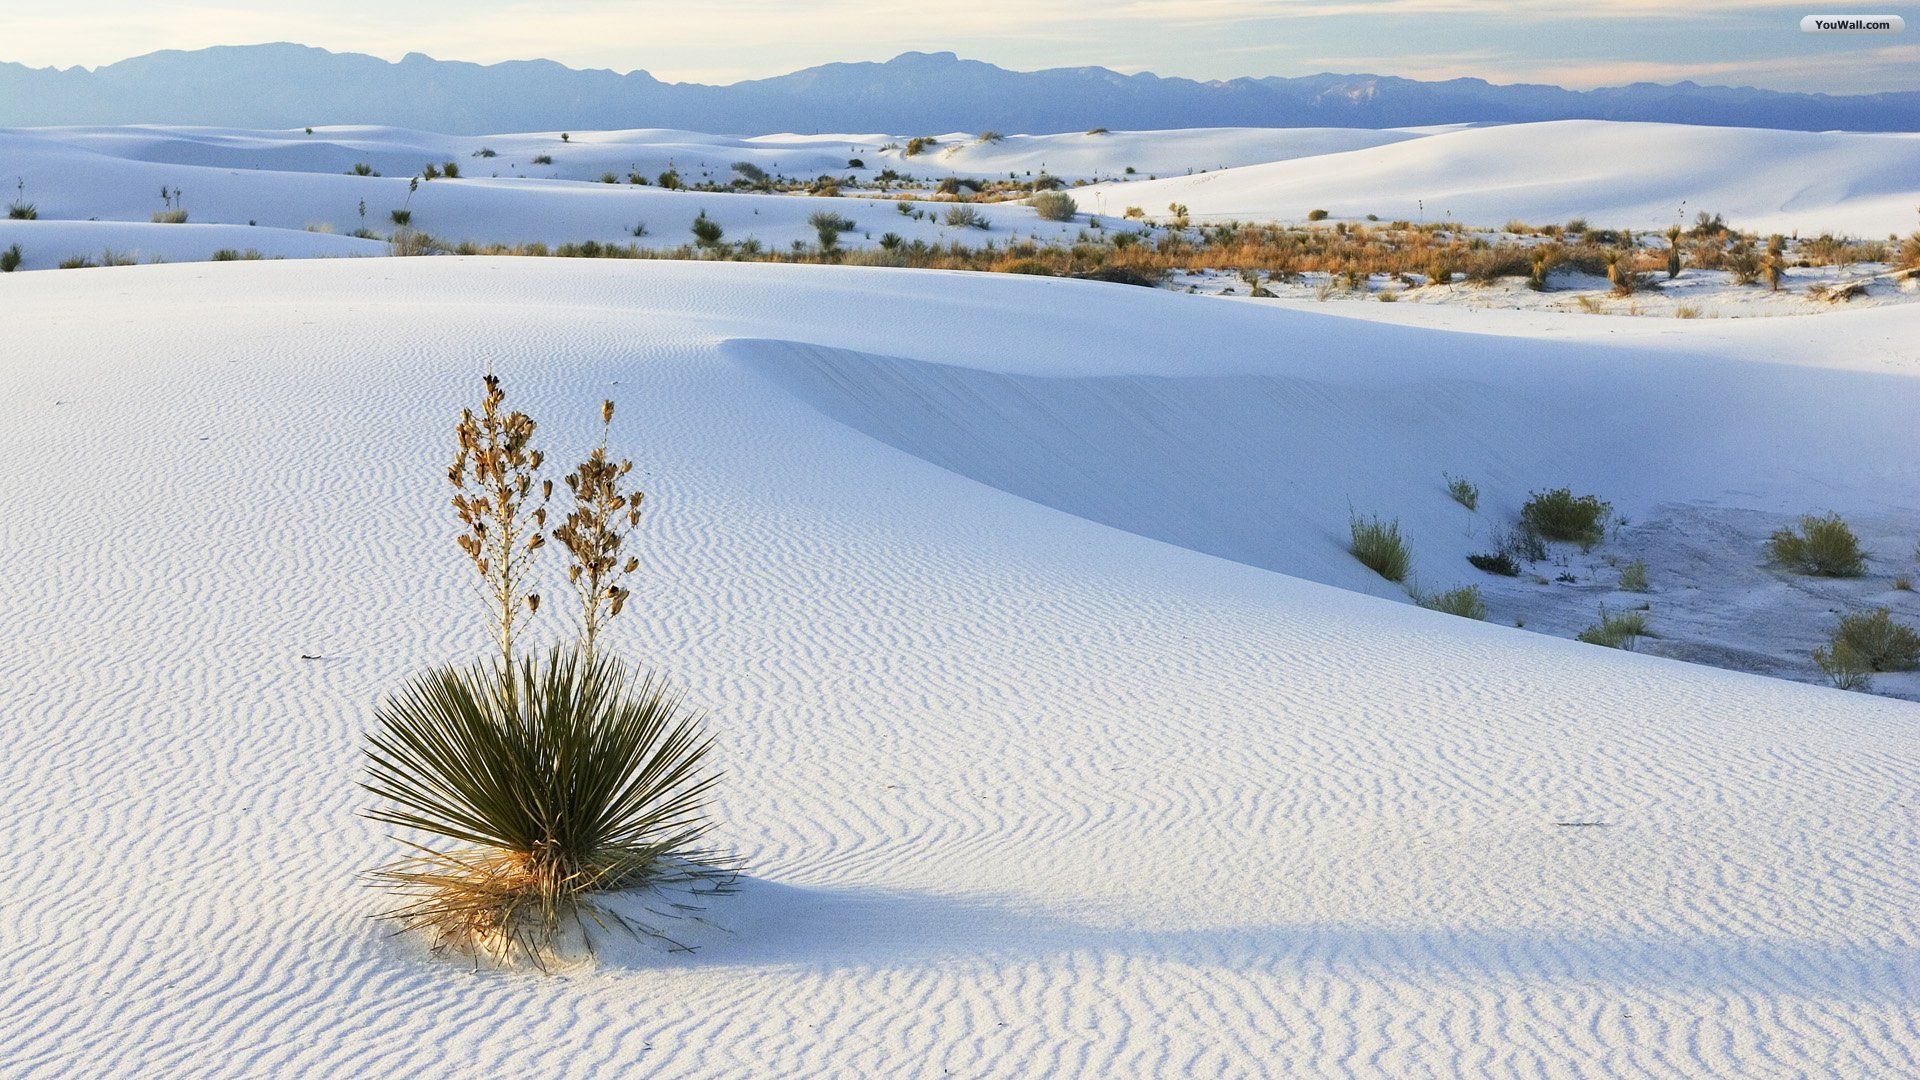 Snow On A Mountain Behind The Desert Wallpapers